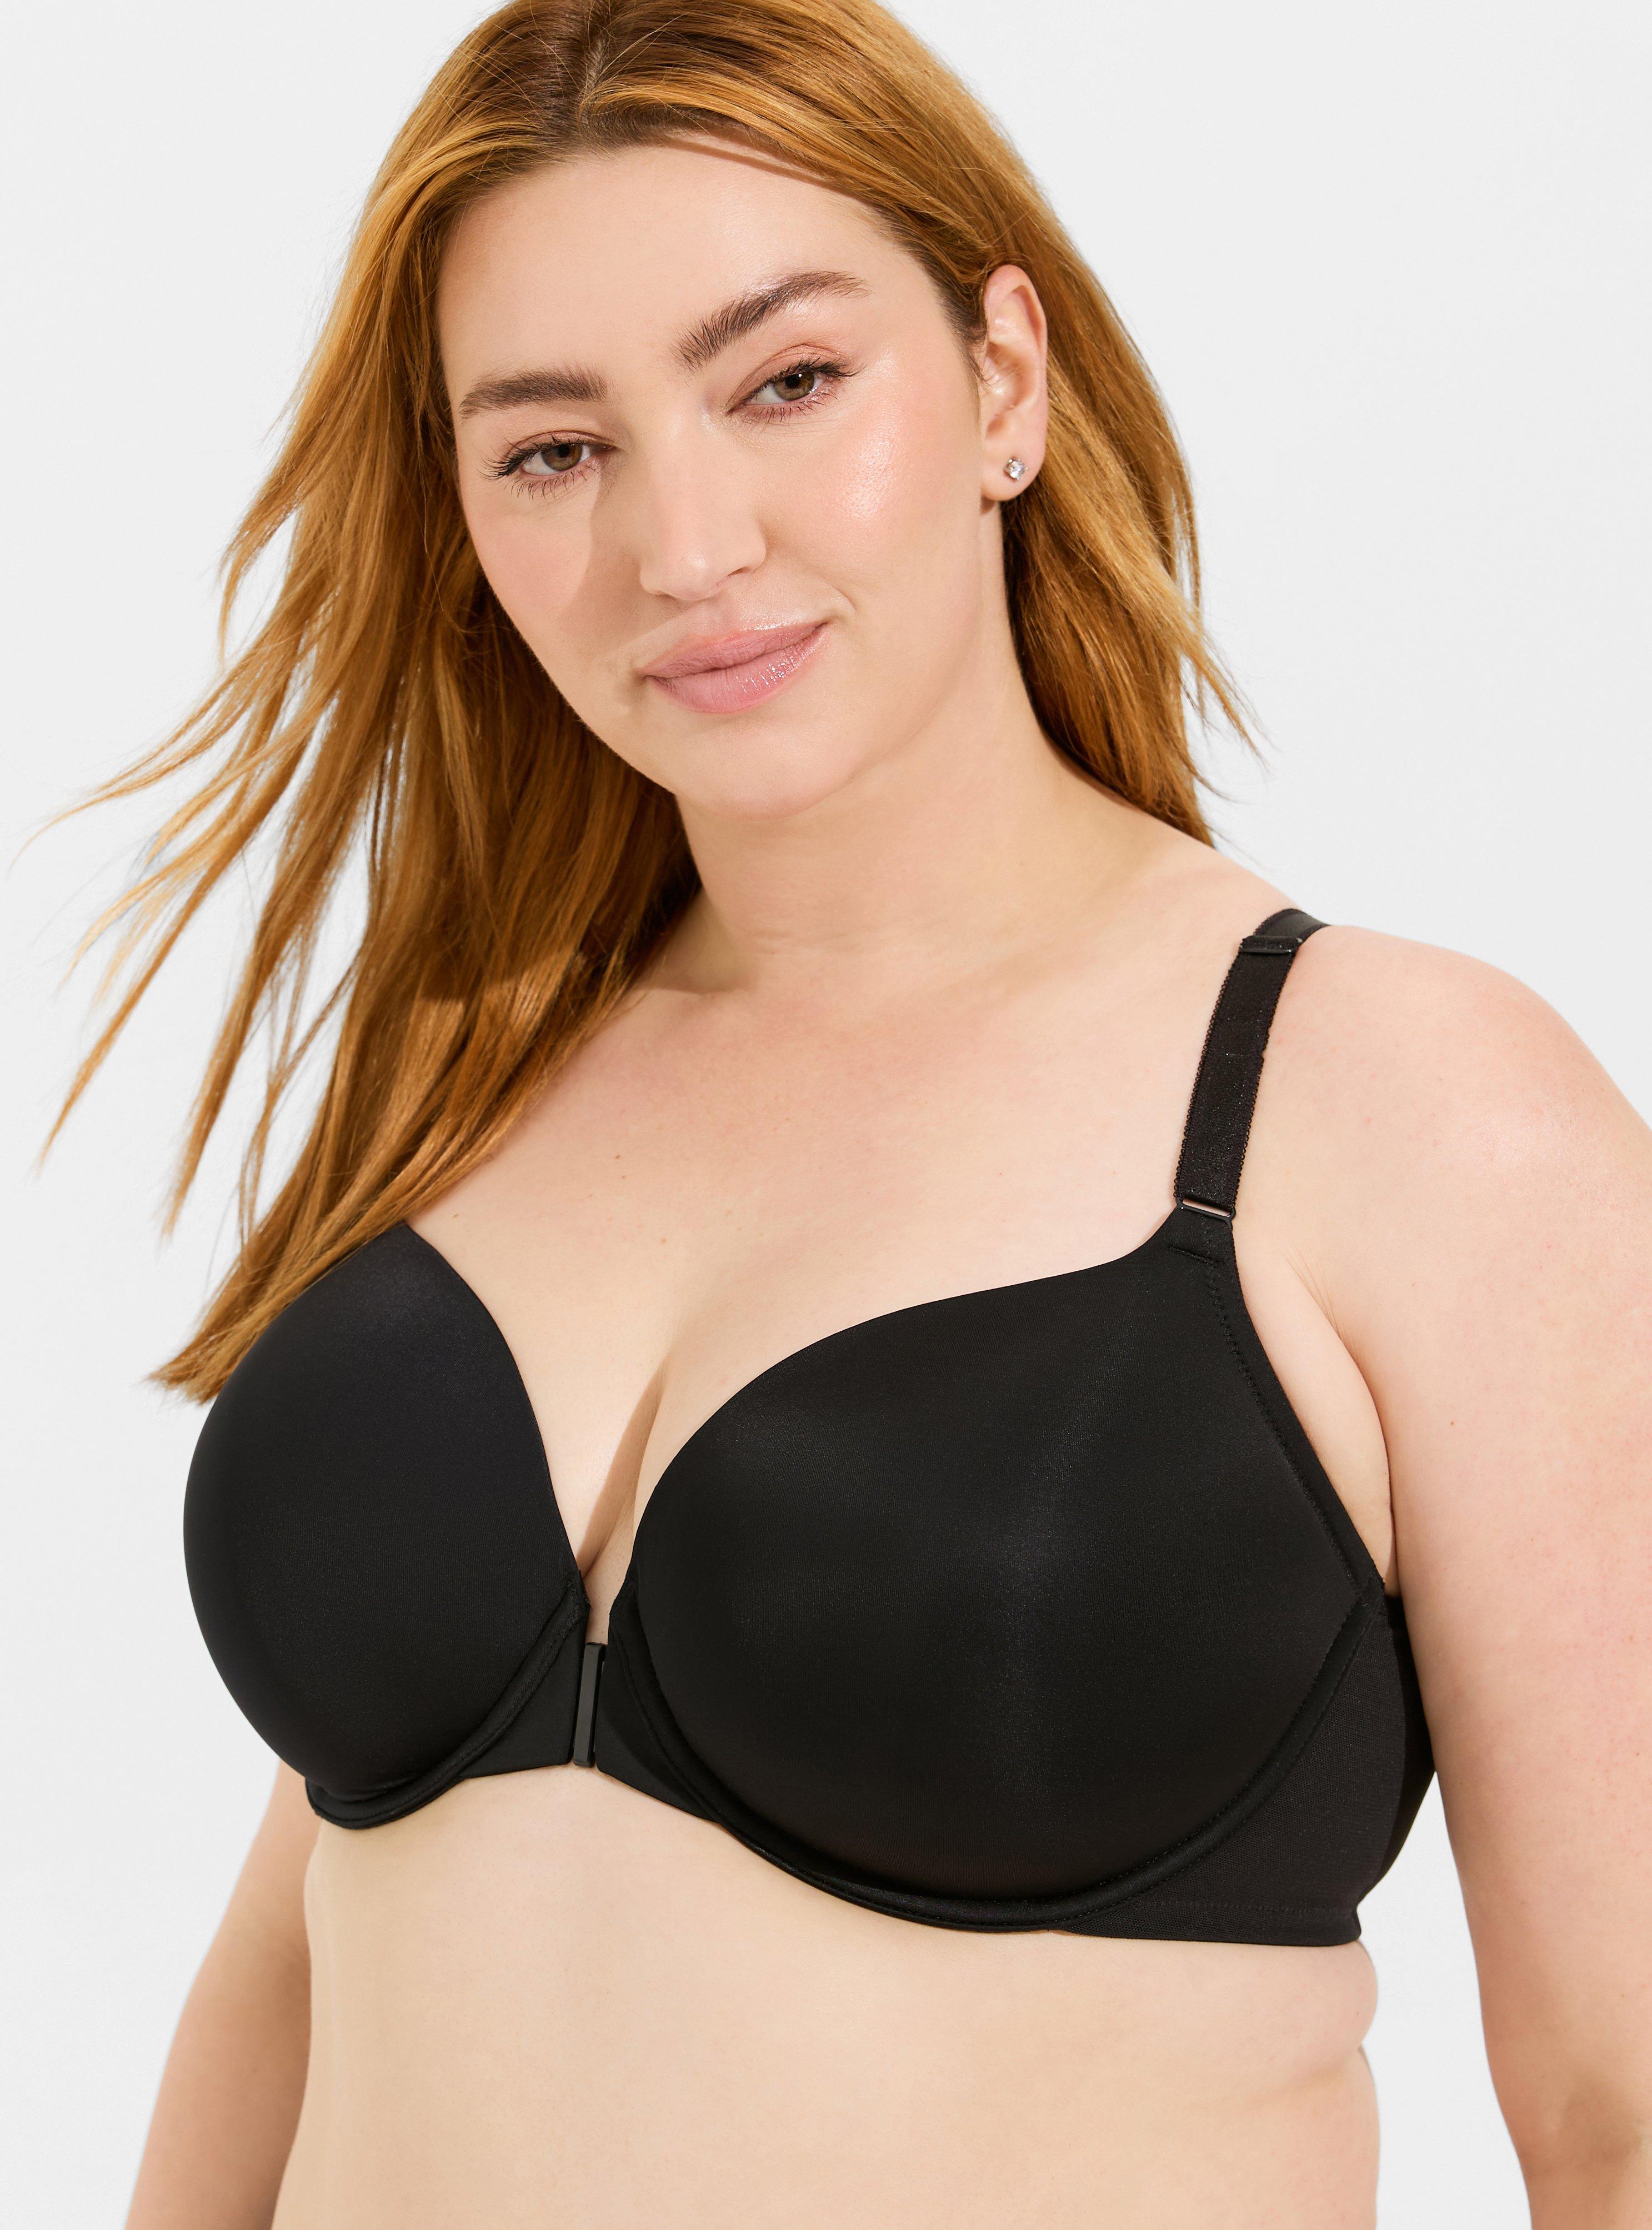 Torrid 44C NWT Everyday Wire-Free Lightly Lined Print 360° Back Smoothing  Bra Size 44 C - $29 (42% Off Retail) New With Tags - From Lisa